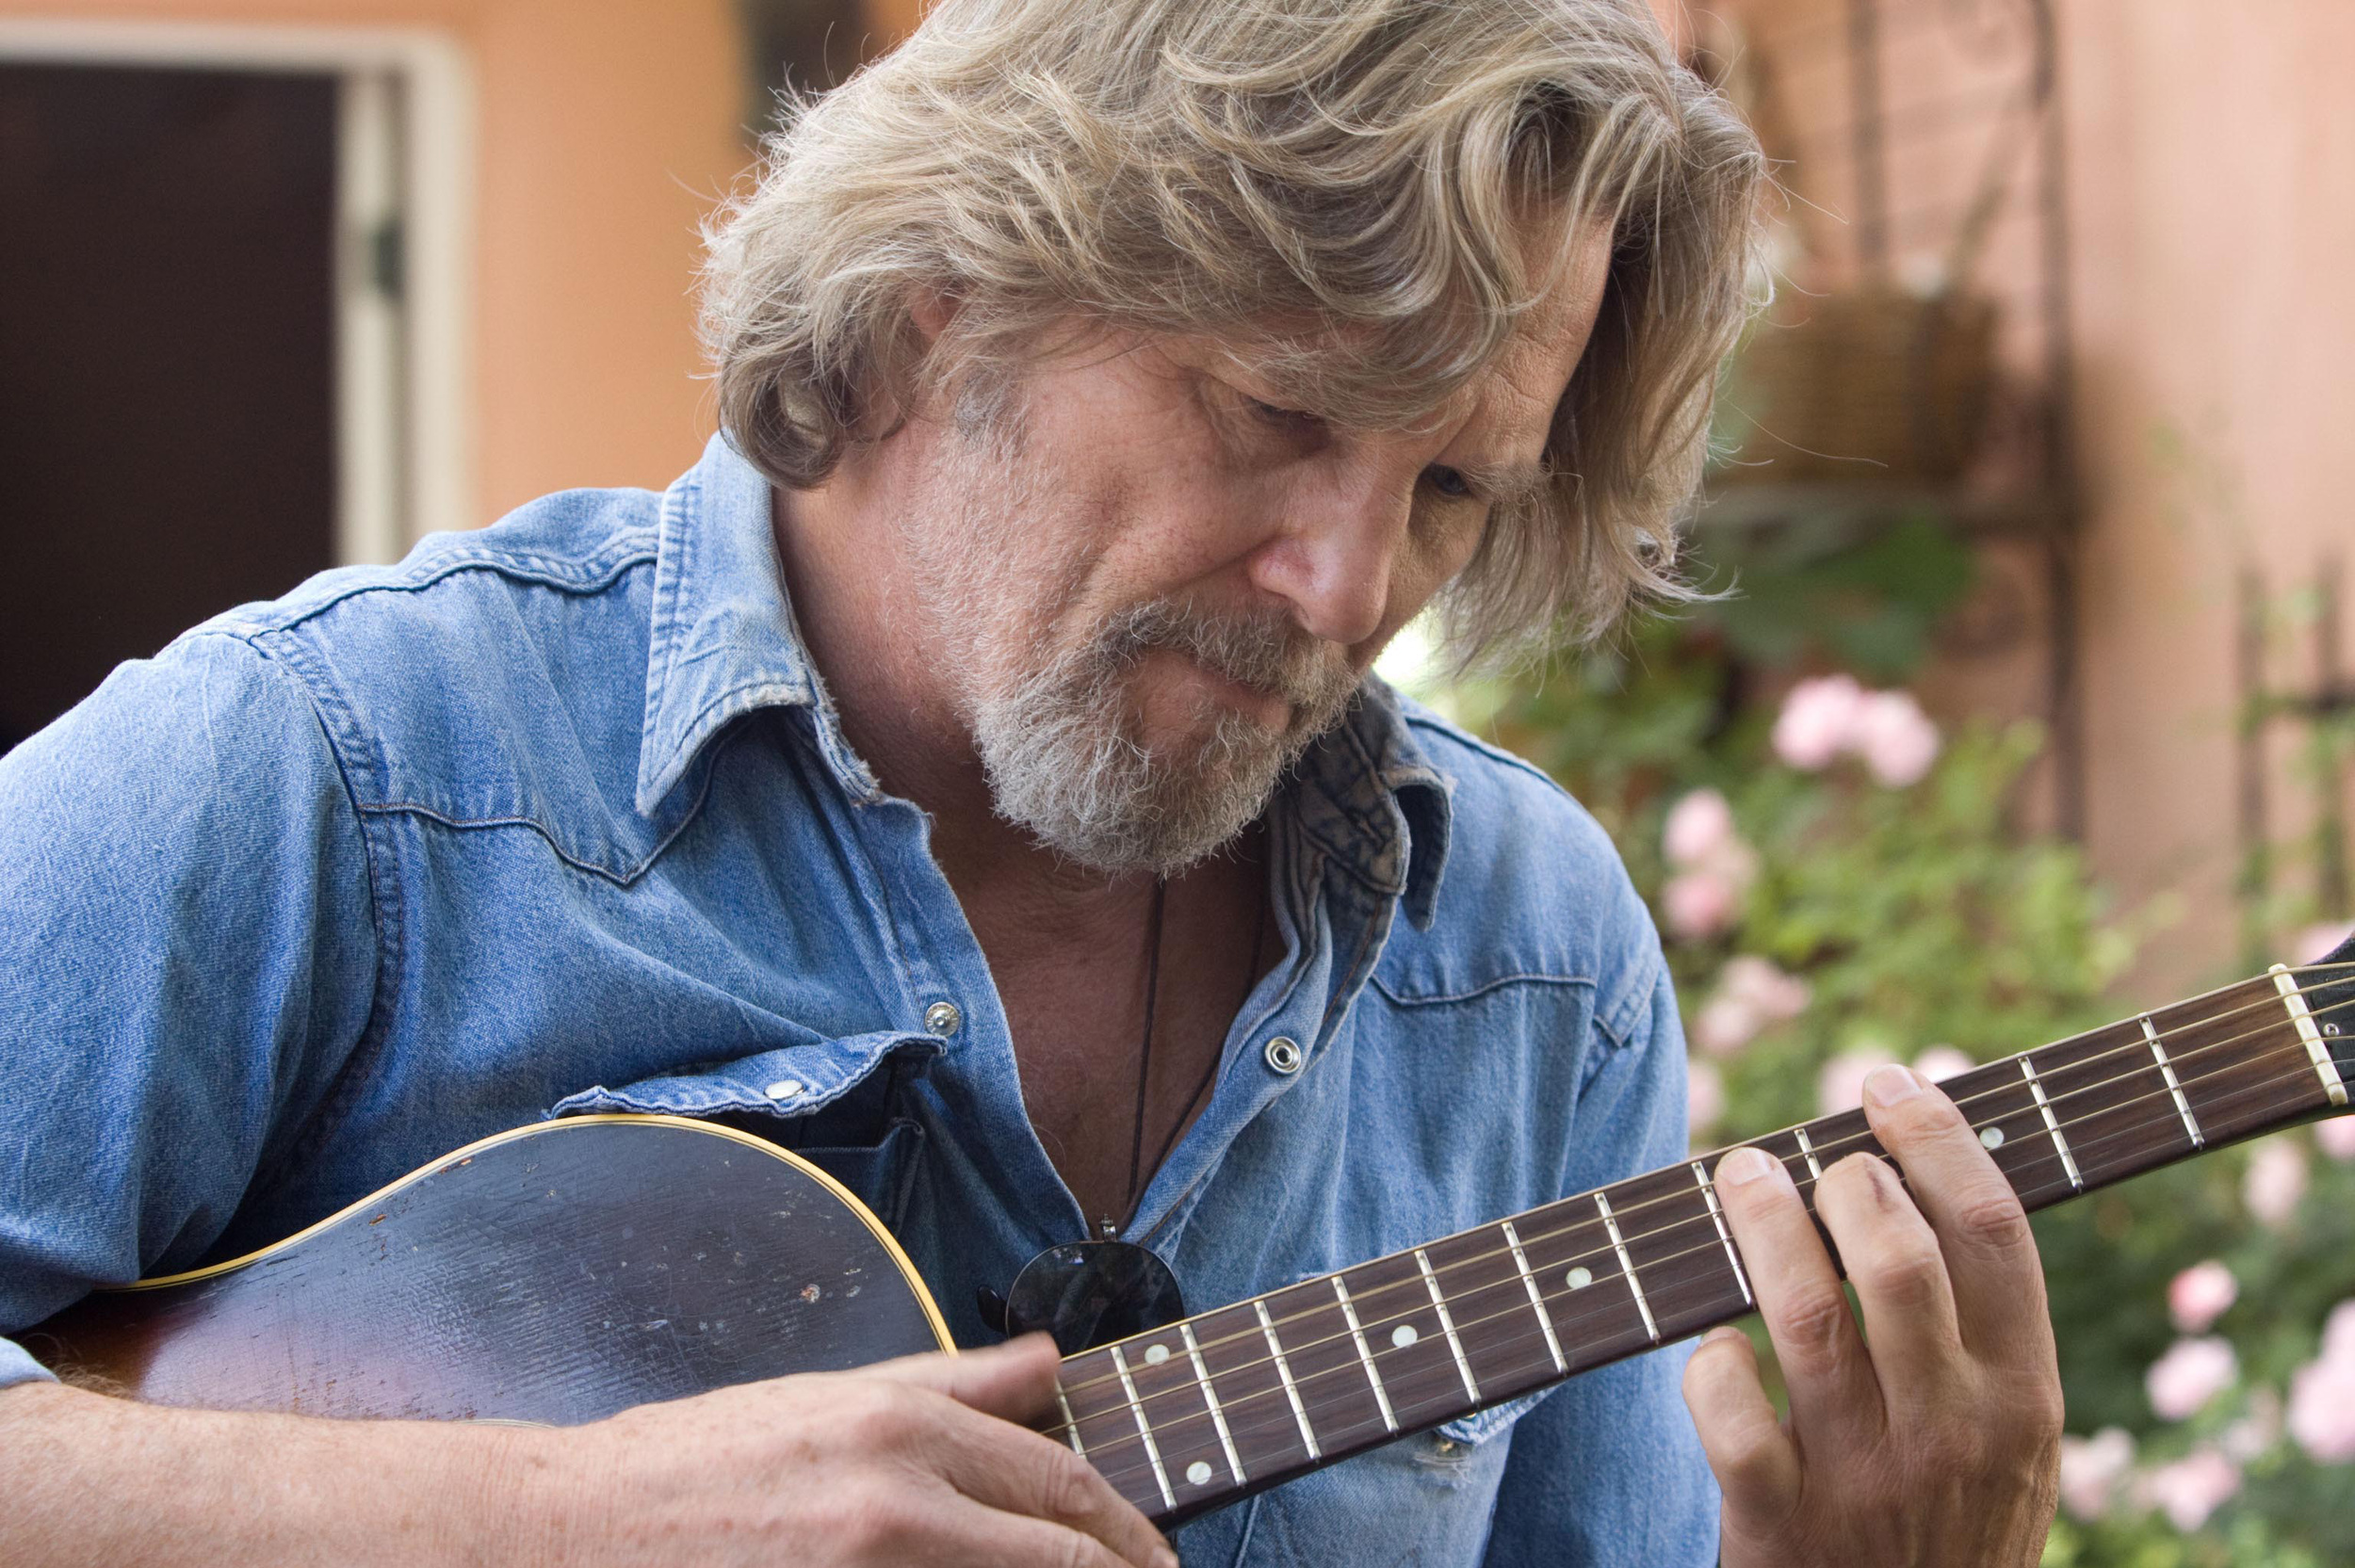 <p>At long last, Bridges won his Oscar. We won’t tell you that <em>Crazy Heart</em> is his best work. It’s definitely not his best movie by any stretch. That’s not really Bridges fault, though. Sure, he’s a bit tic-heavy in his performance, and it’s showy, but Bridges finally won his Oscar, and that makes <em>Crazy Heart </em>memorable forever.</p><p><a href='https://www.msn.com/en-us/community/channel/vid-cj9pqbr0vn9in2b6ddcd8sfgpfq6x6utp44fssrv6mc2gtybw0us'>Follow us on MSN to see more of our exclusive entertainment content.</a></p>